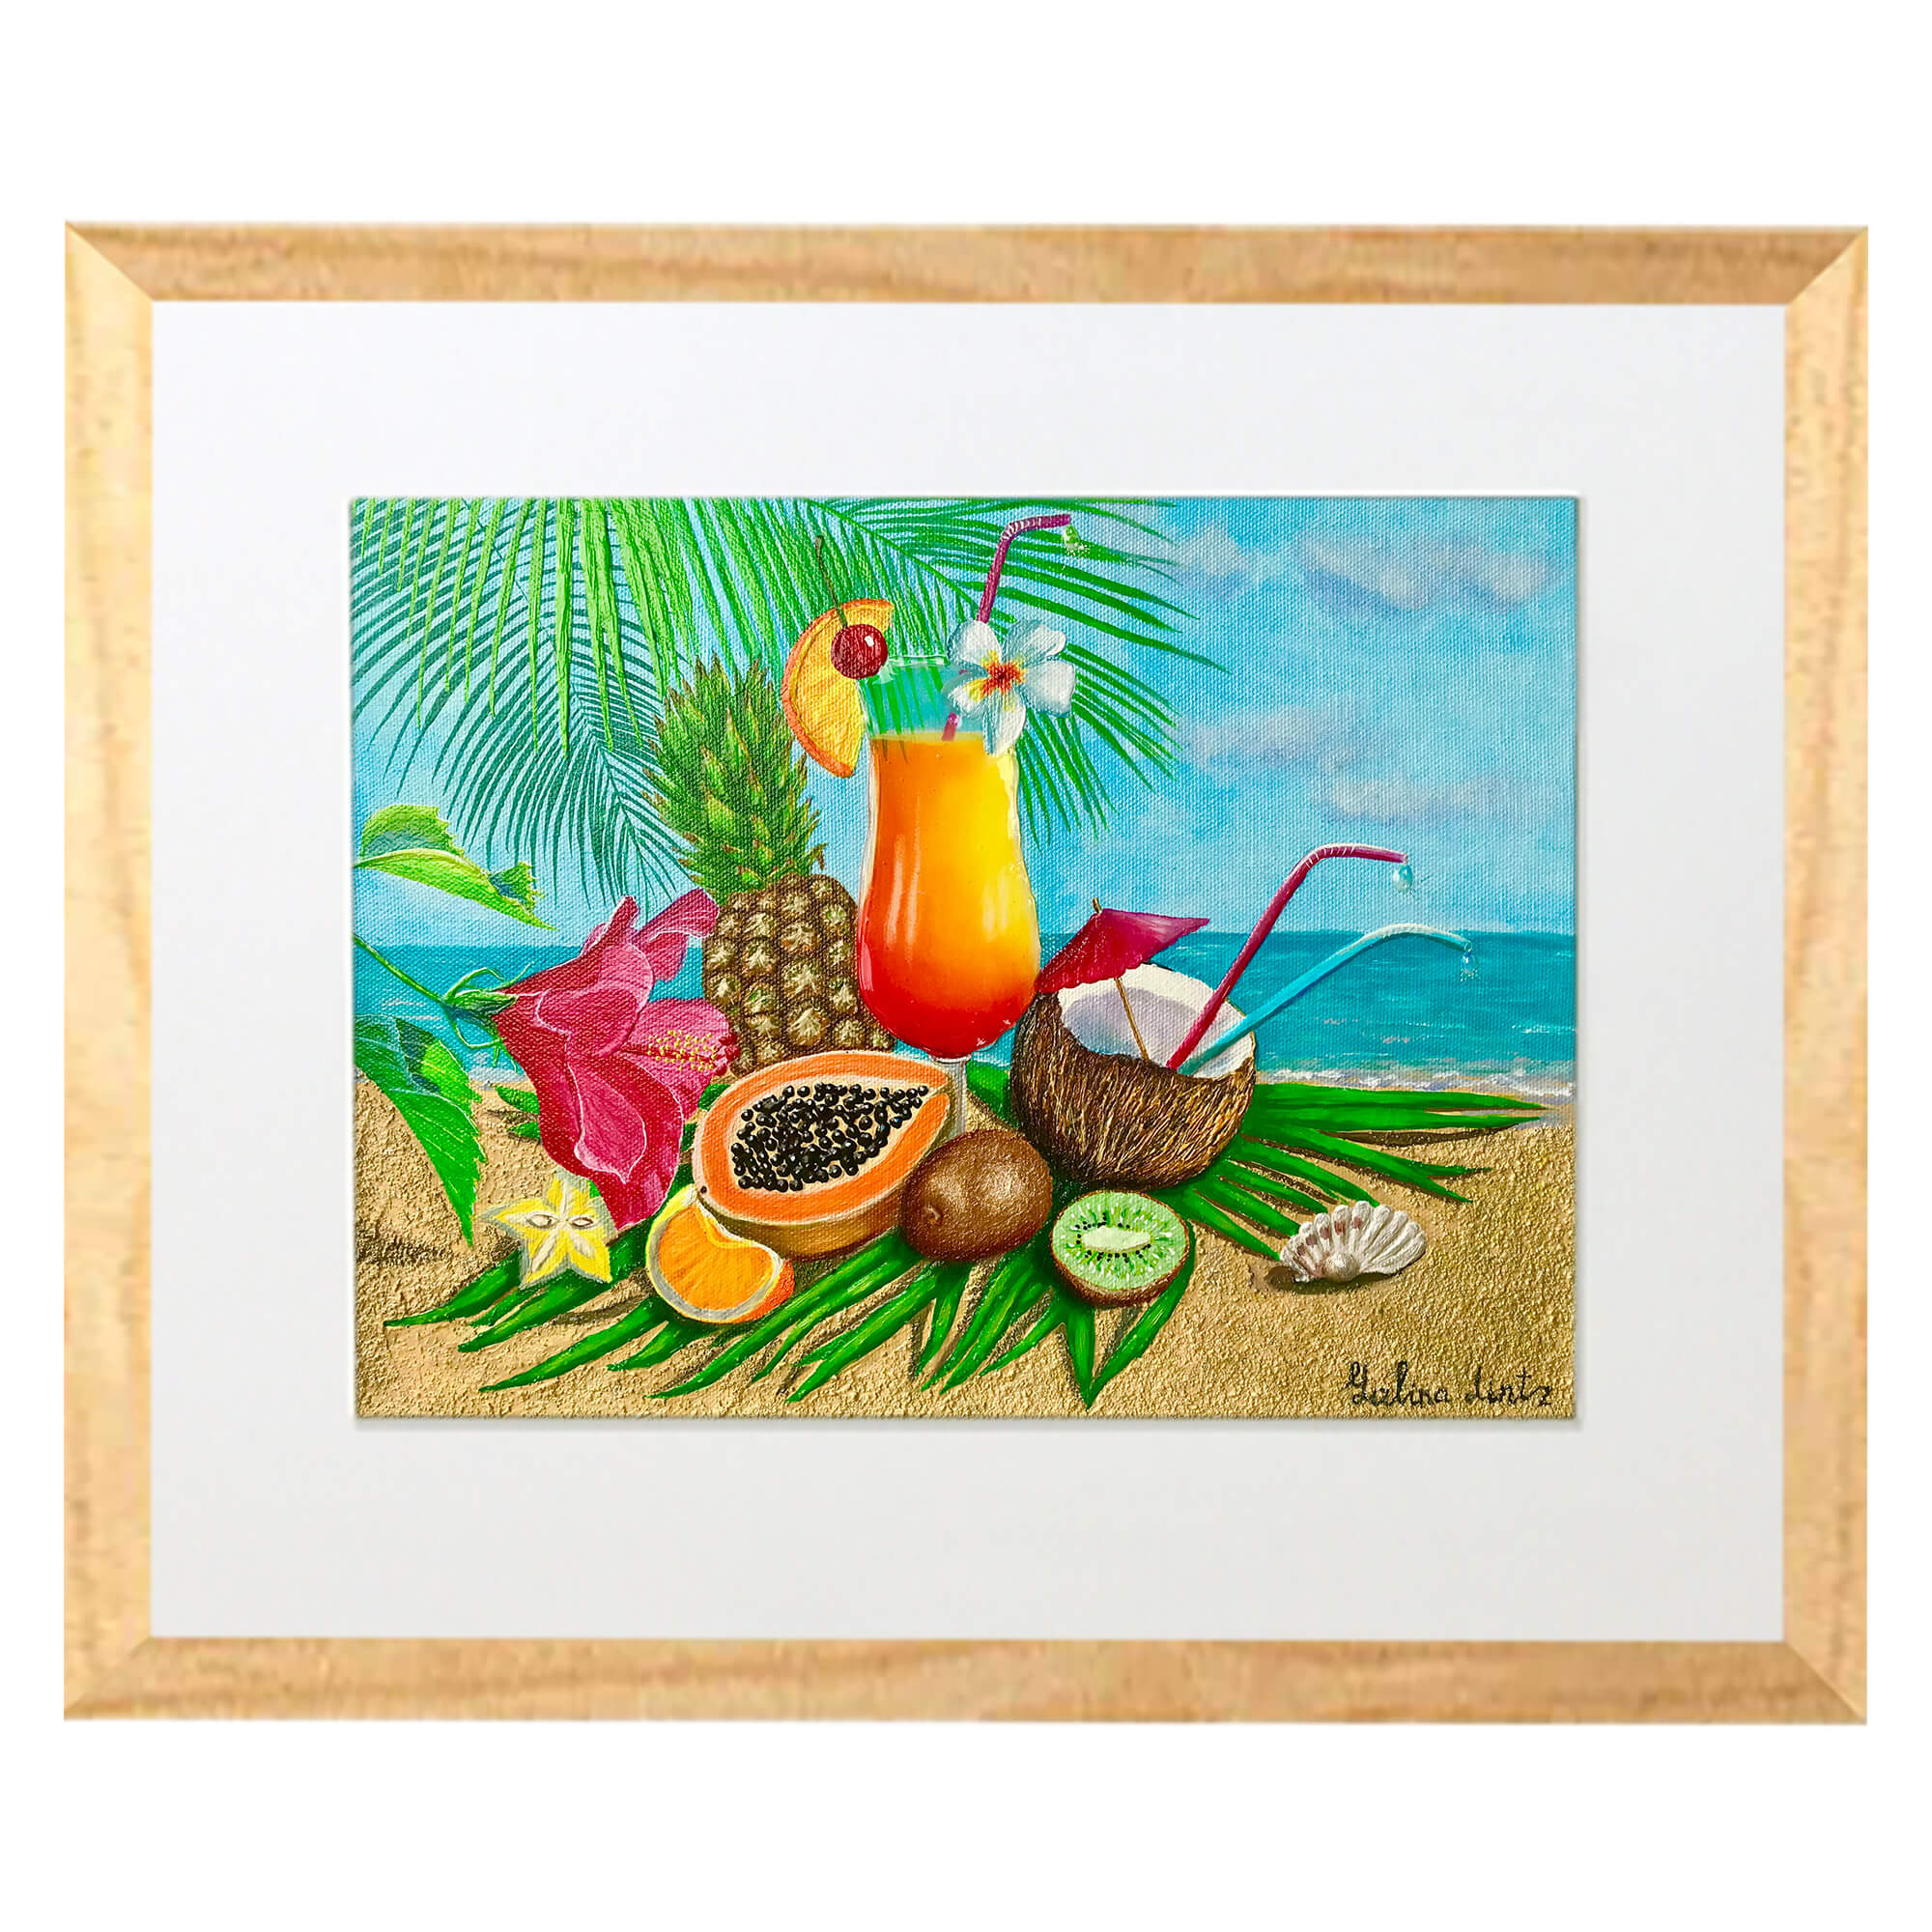 Matted art print with wood frame featuring a coconut by hawaii artist Galina Lintz